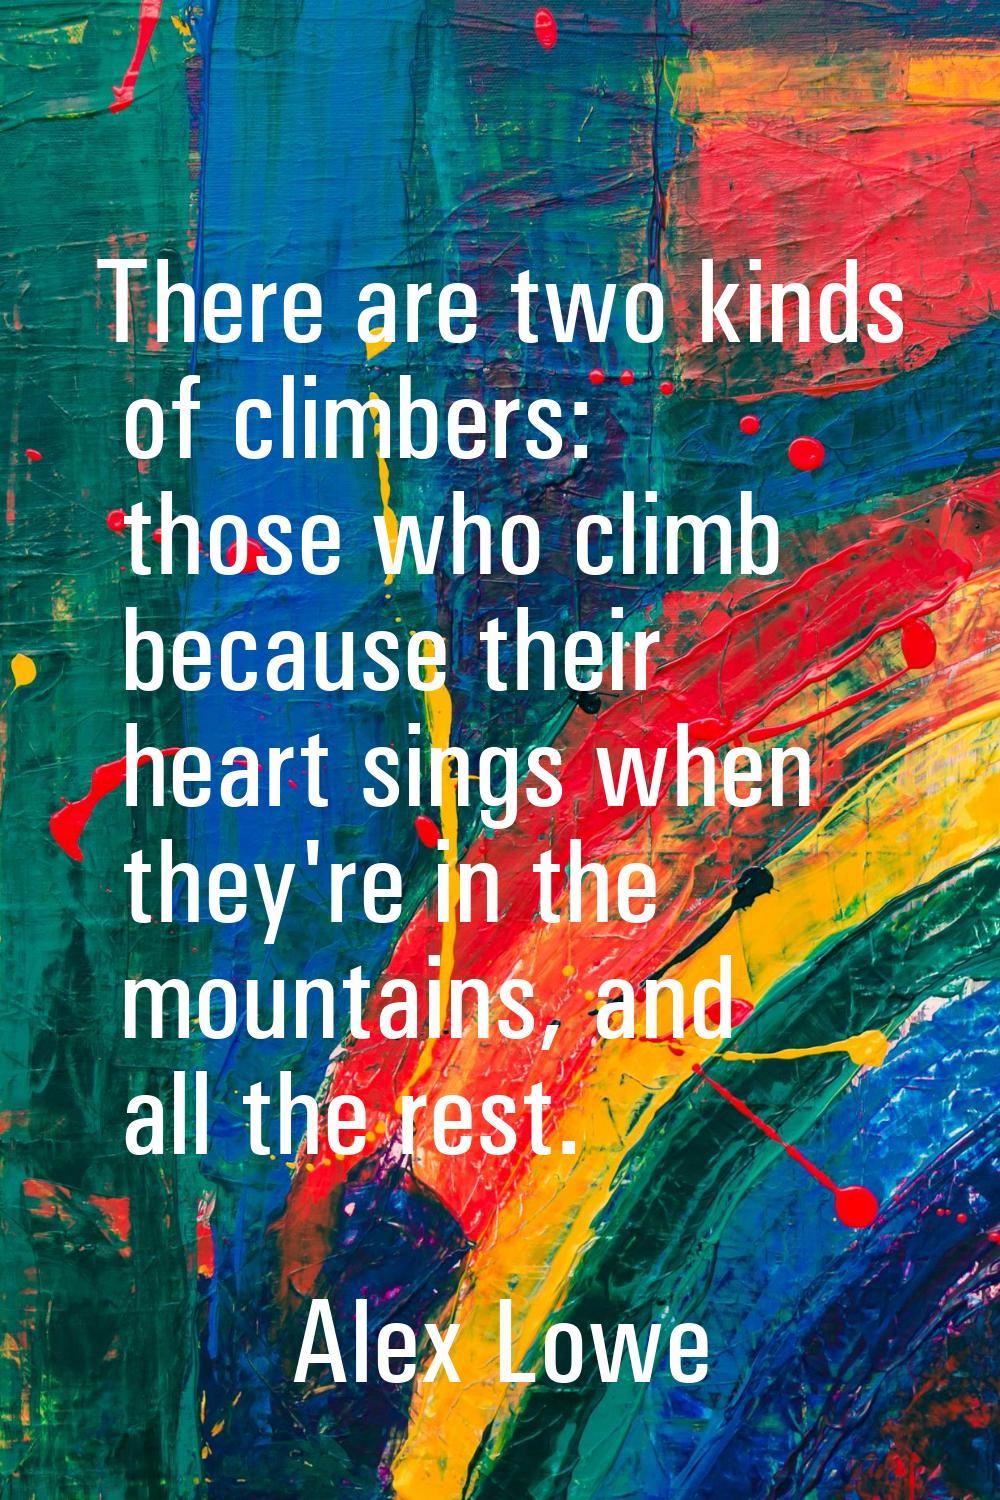 There are two kinds of climbers: those who climb because their heart sings when they're in the moun